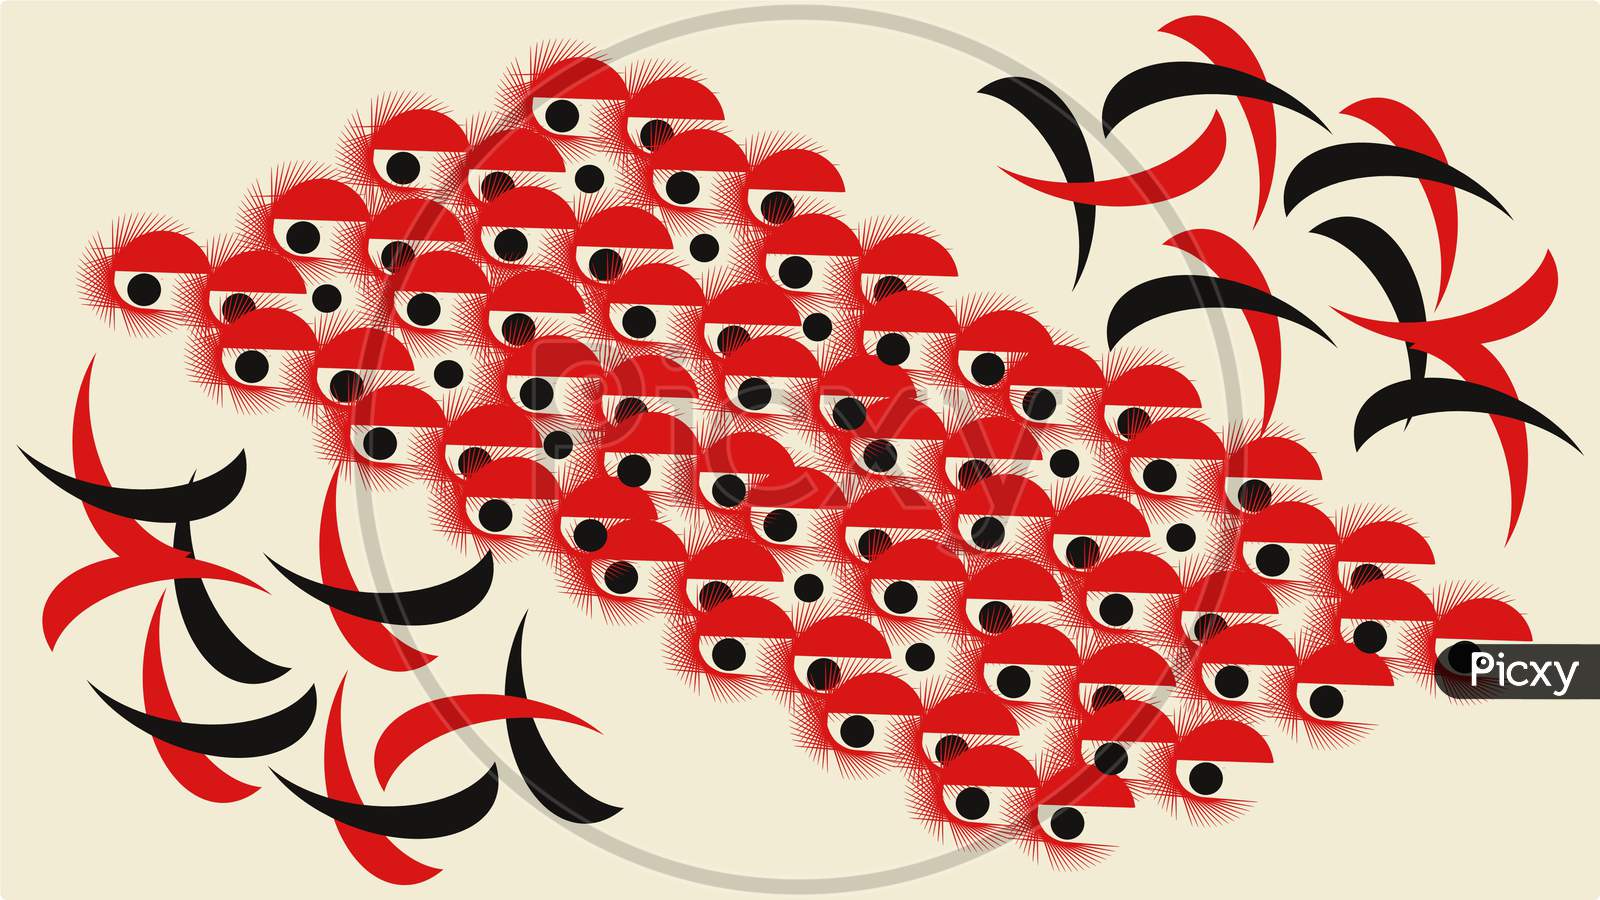 Red Eyes, Abstract, Vector Graphic Design. Eye Icons, Abstract Wallpaper, Isolated On Cream Color Background.